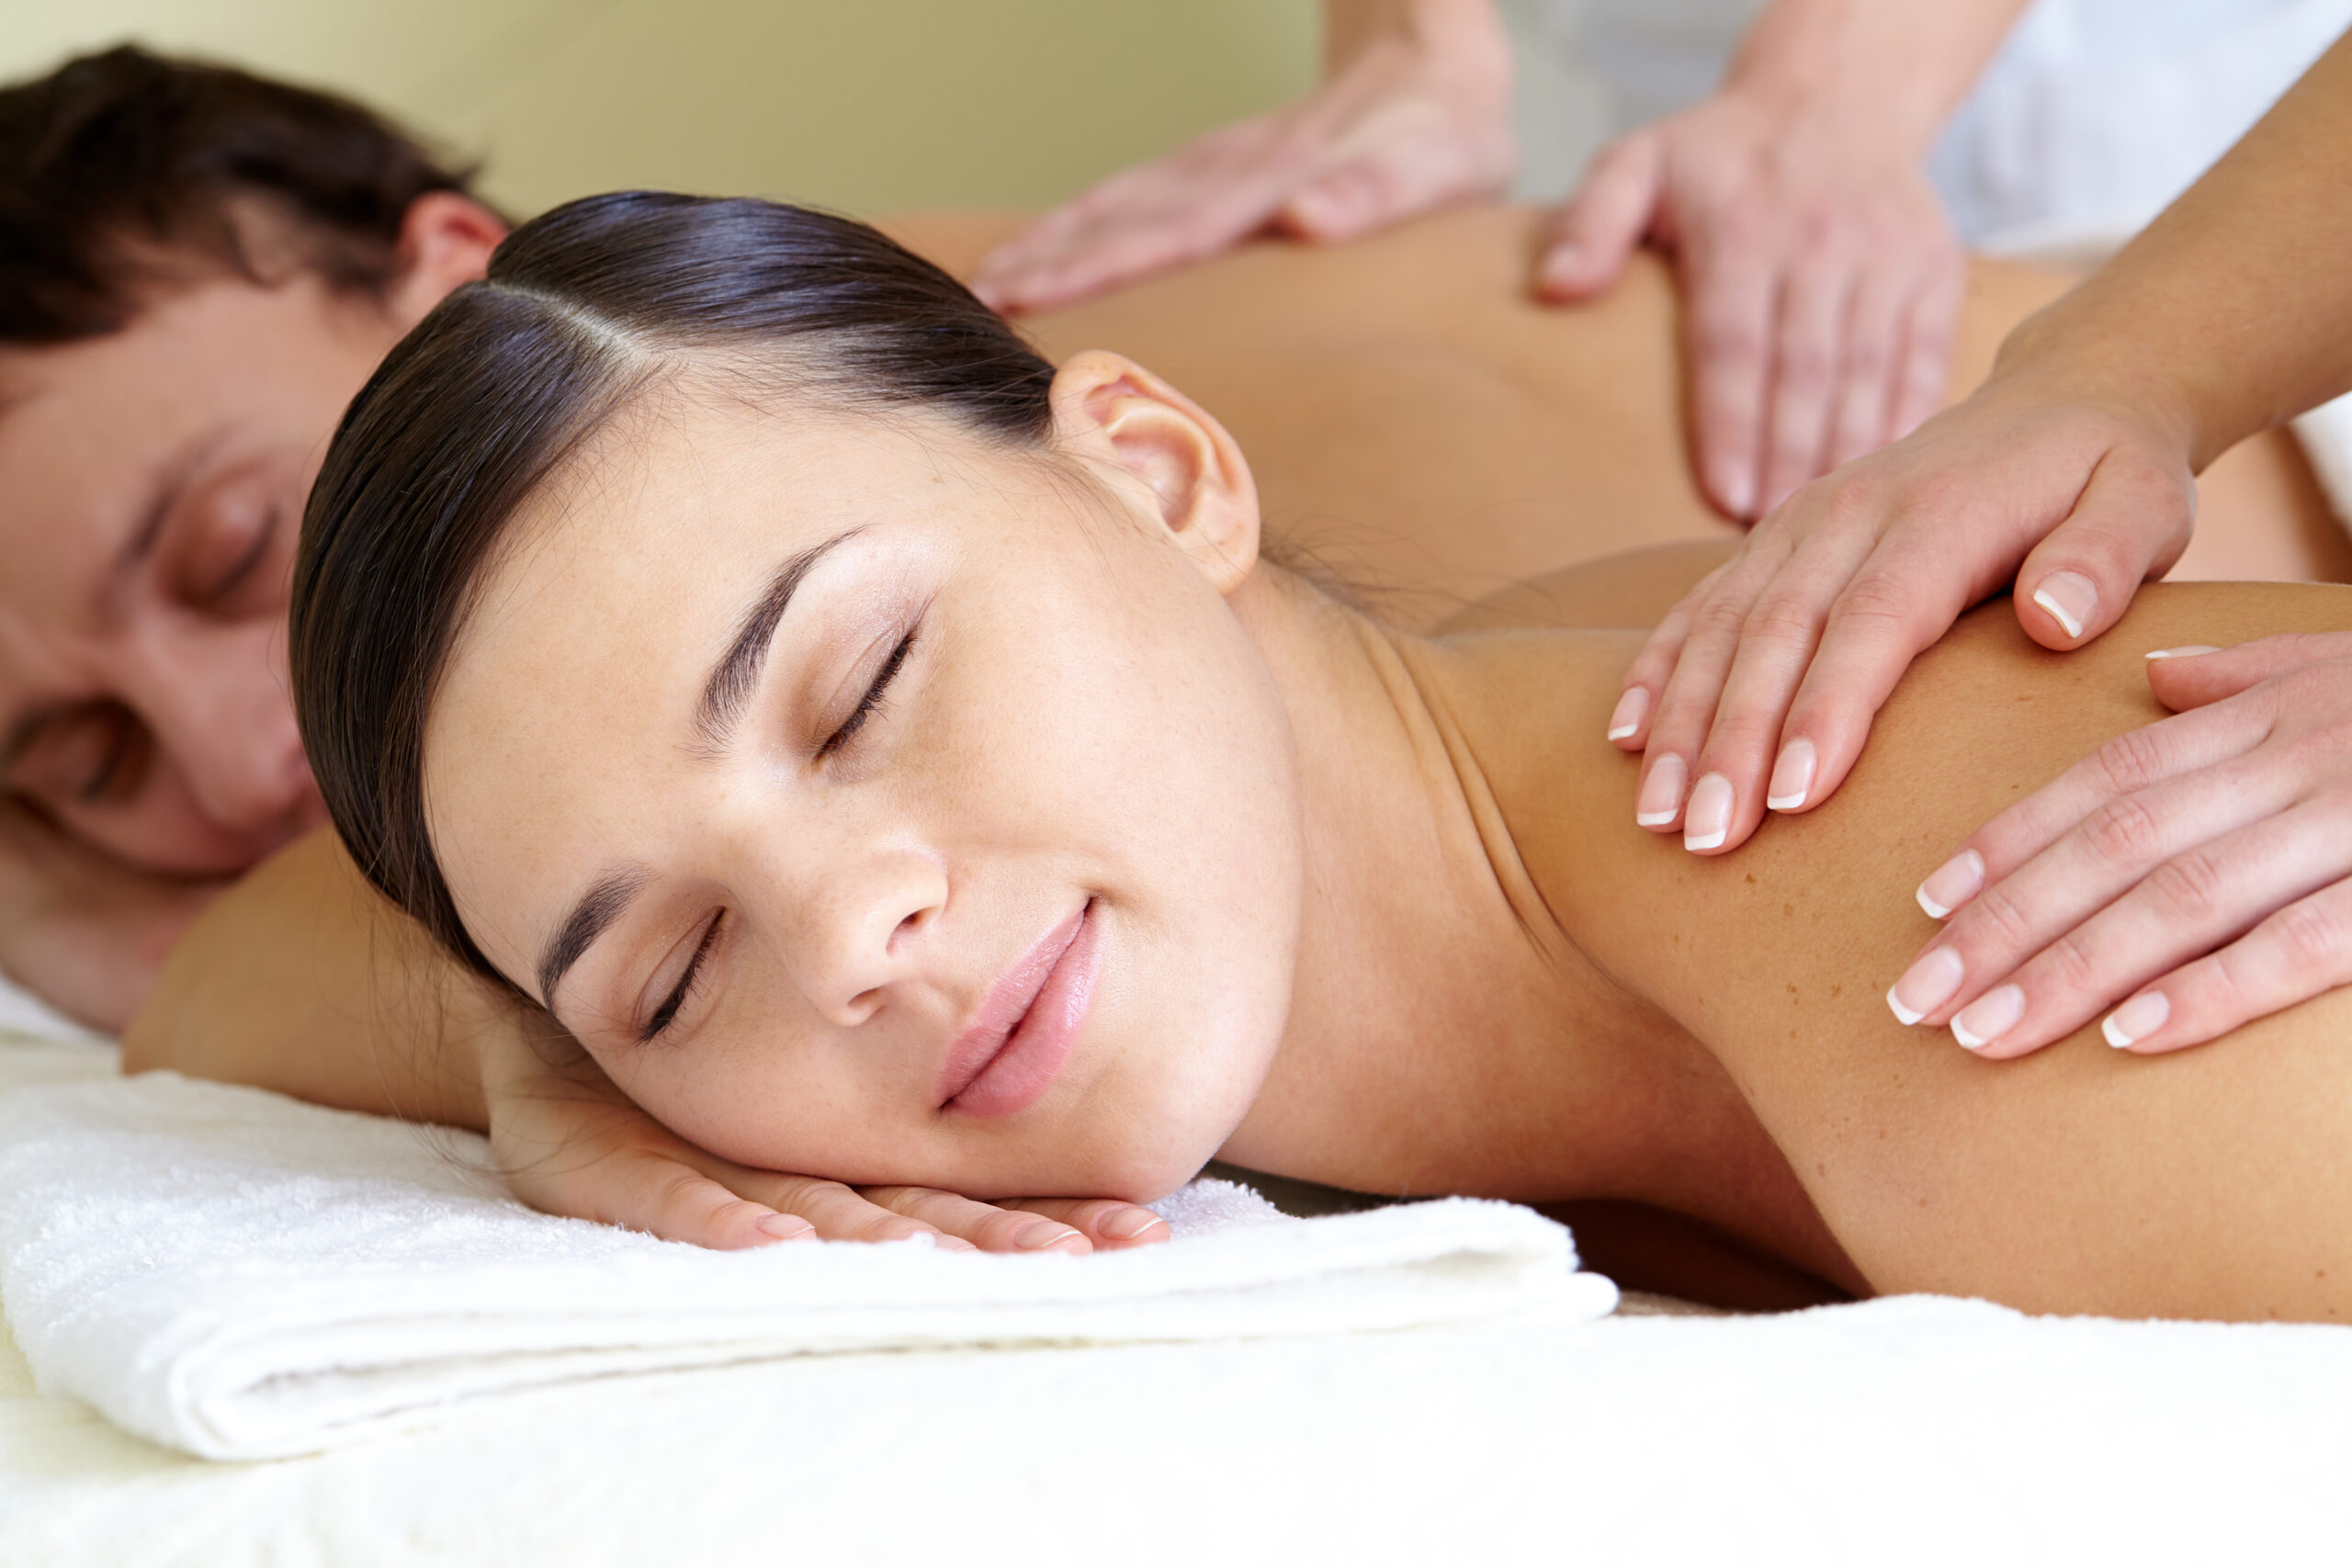 Can massage therapy help improve circulation and reduce pain for people with arthritis?